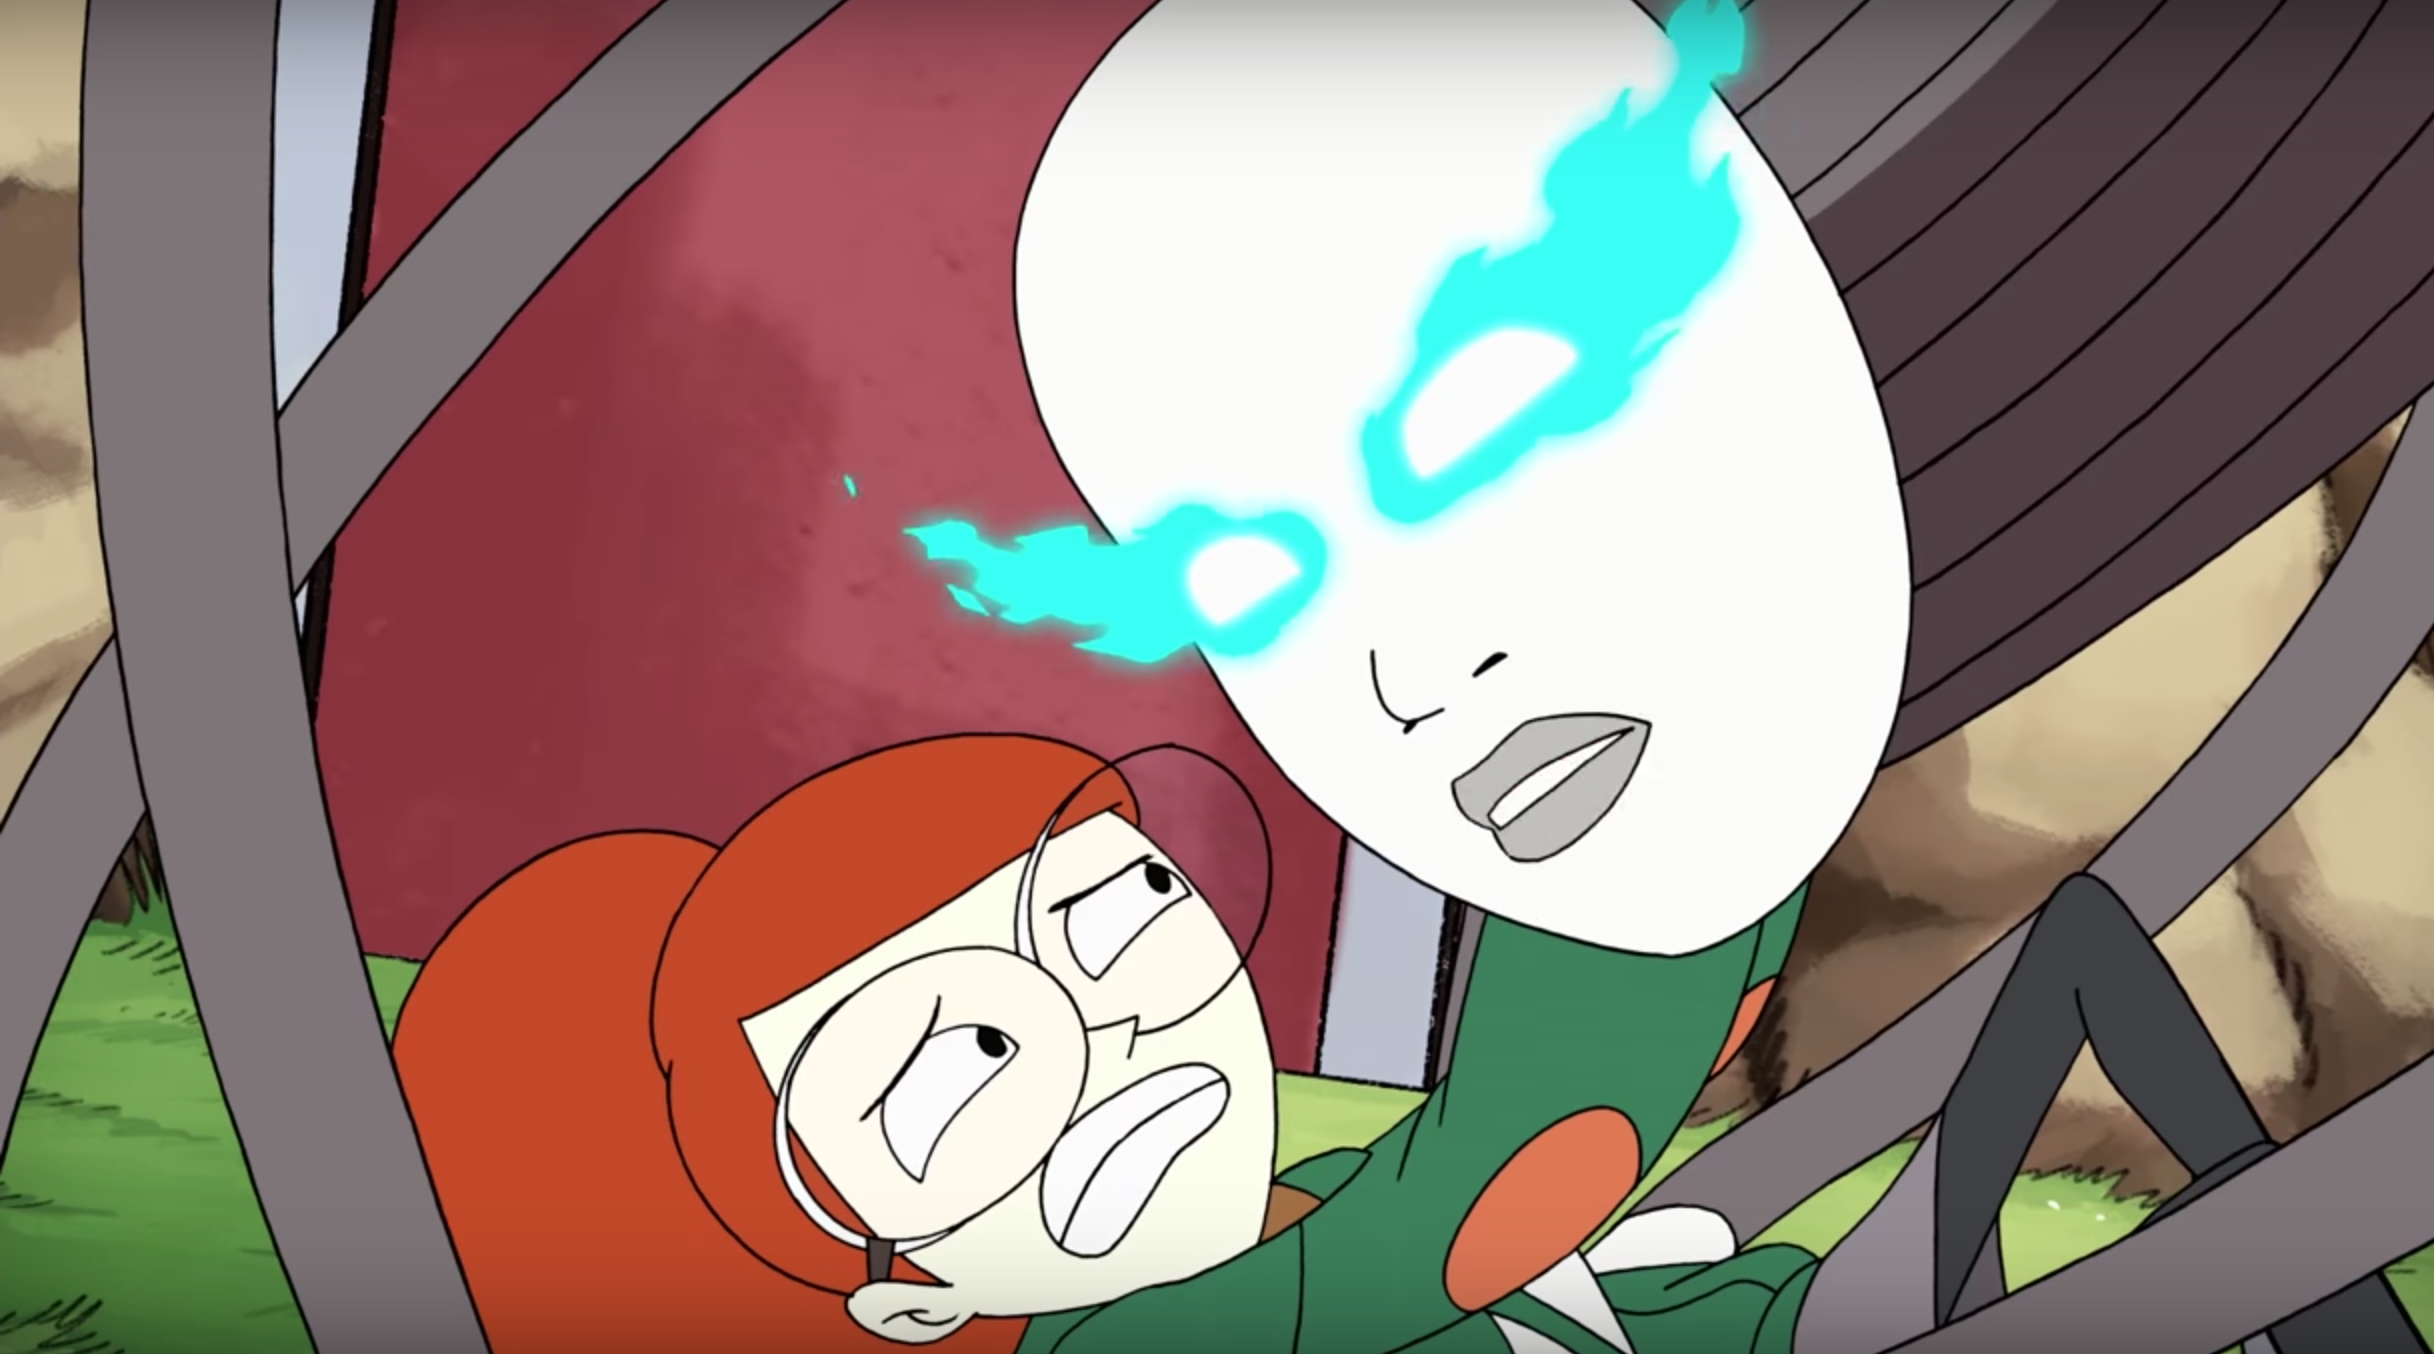 Tulip Pinned Down episode of Infinity Train by Owen Dennis